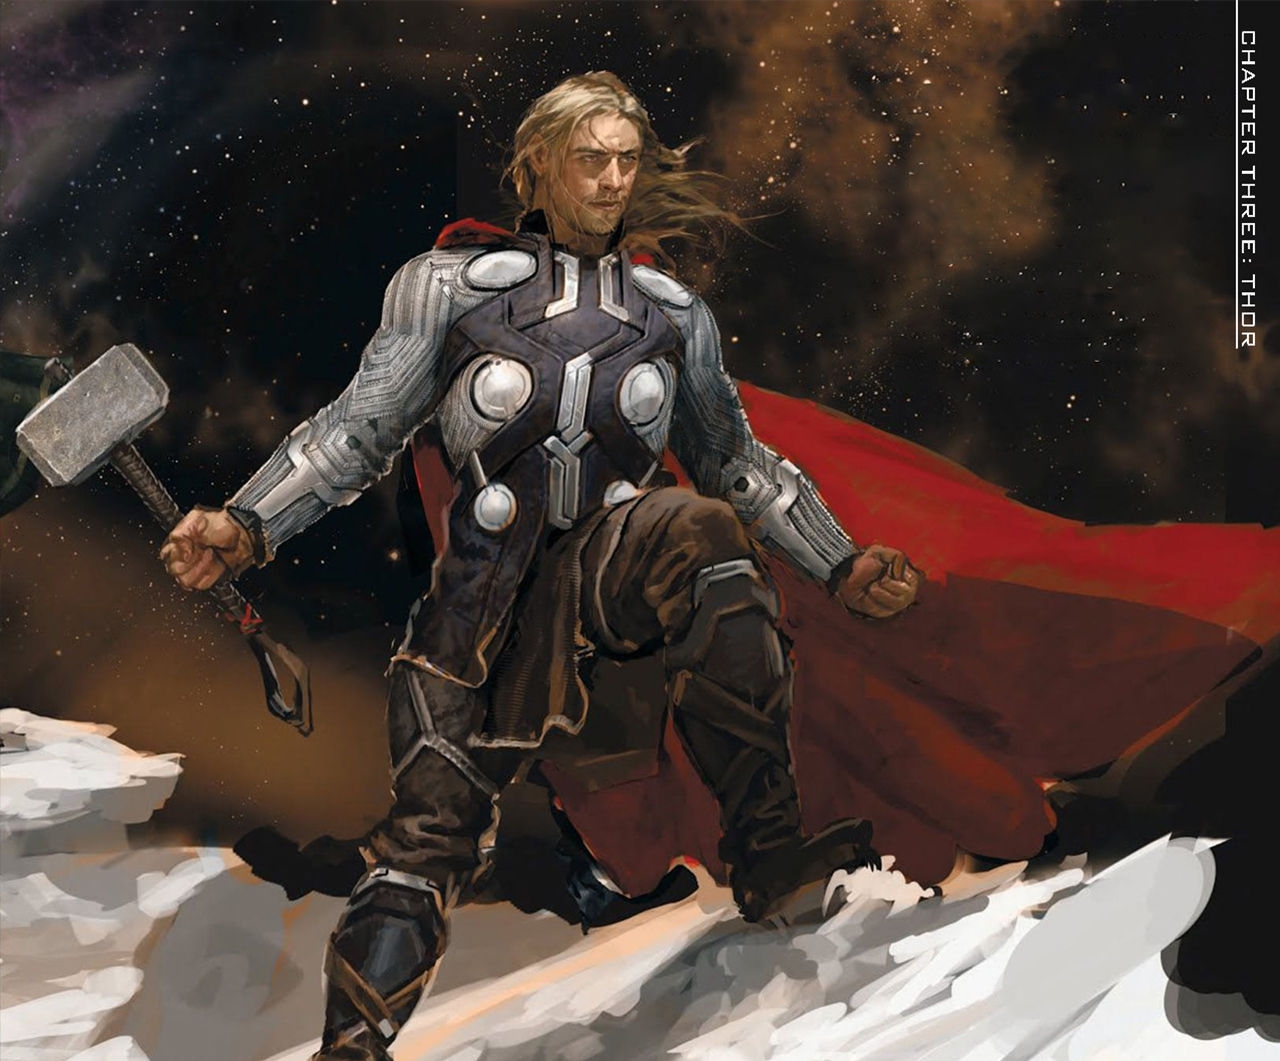 The Road to Marvel's Avengers Age of Ultron - The Art of the Marvel Cinematic Universe 123